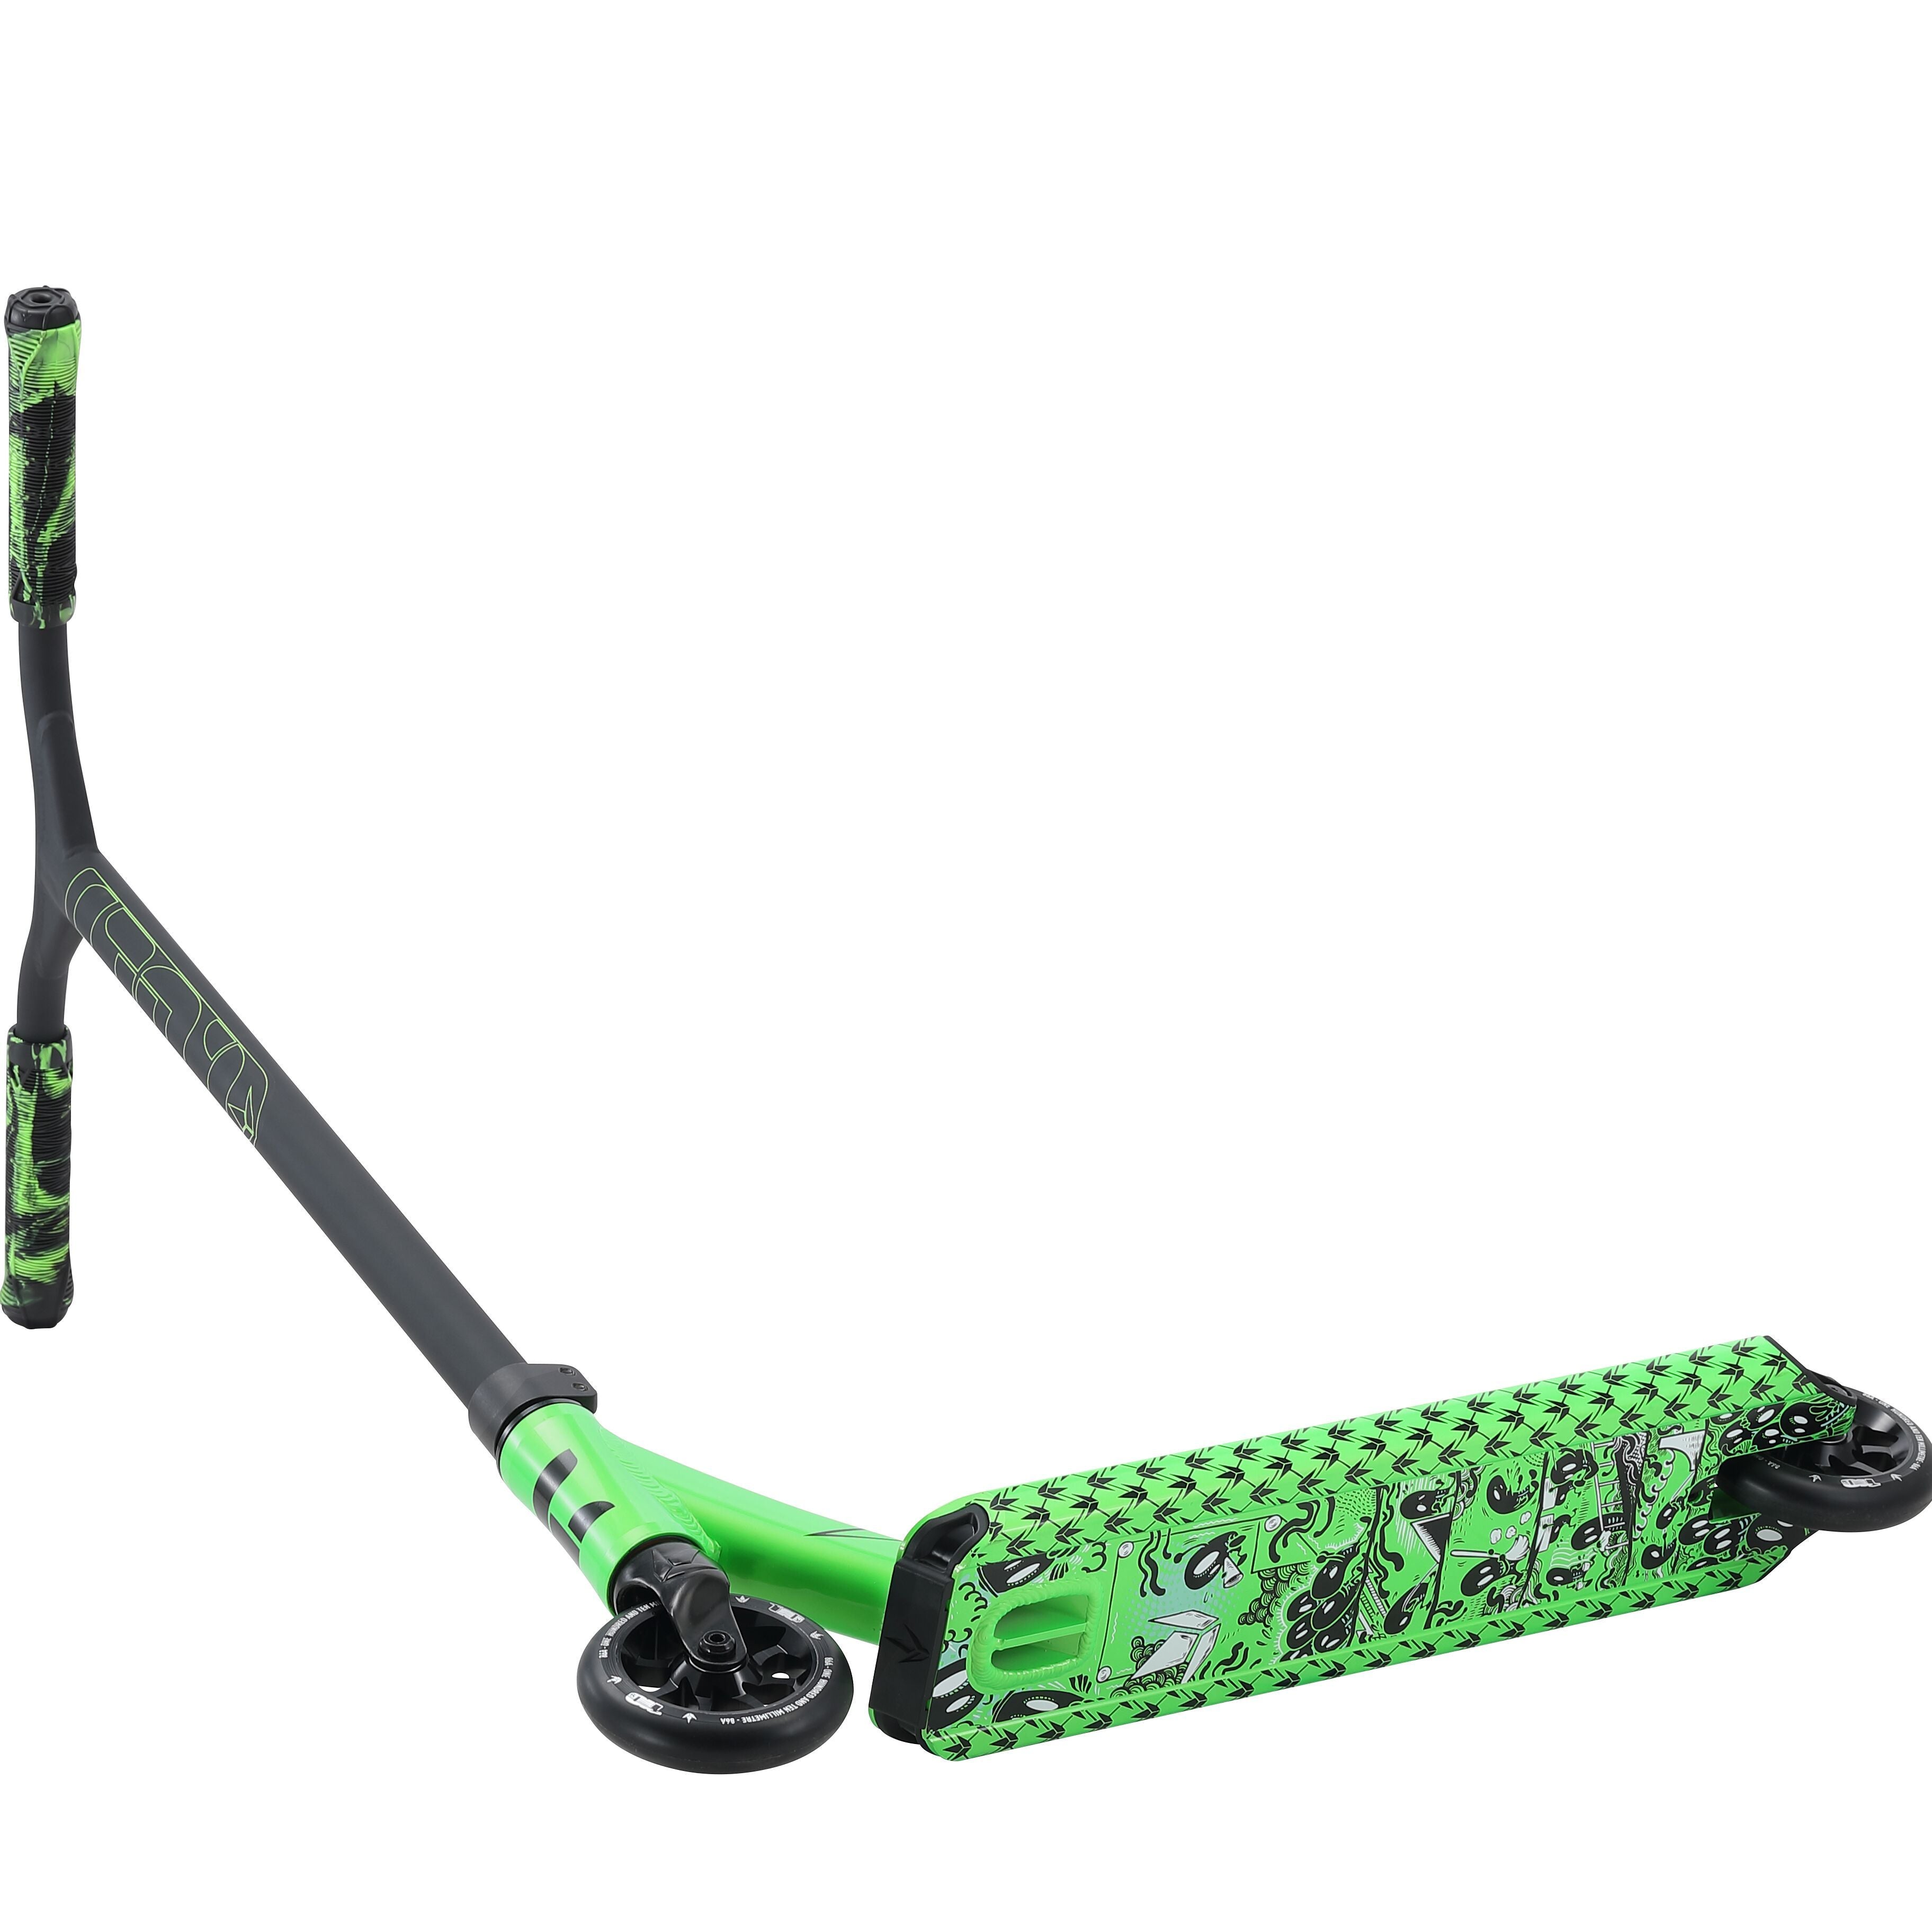 Envy Colt S4 - Scooter Complete Green Bottom View